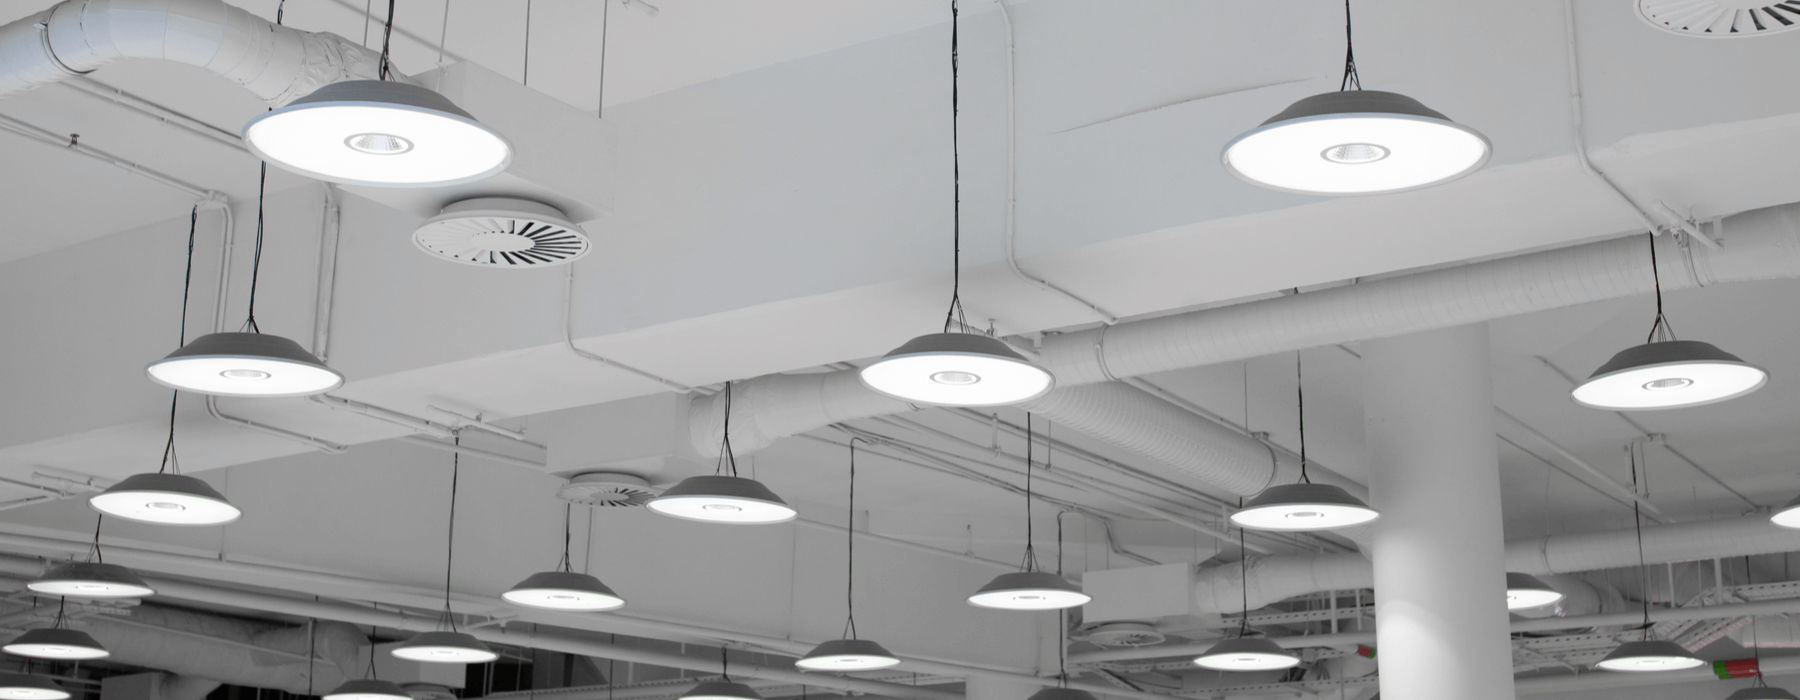 LED Lighting: A Starting Point to Reduce Building Emissions in NYC